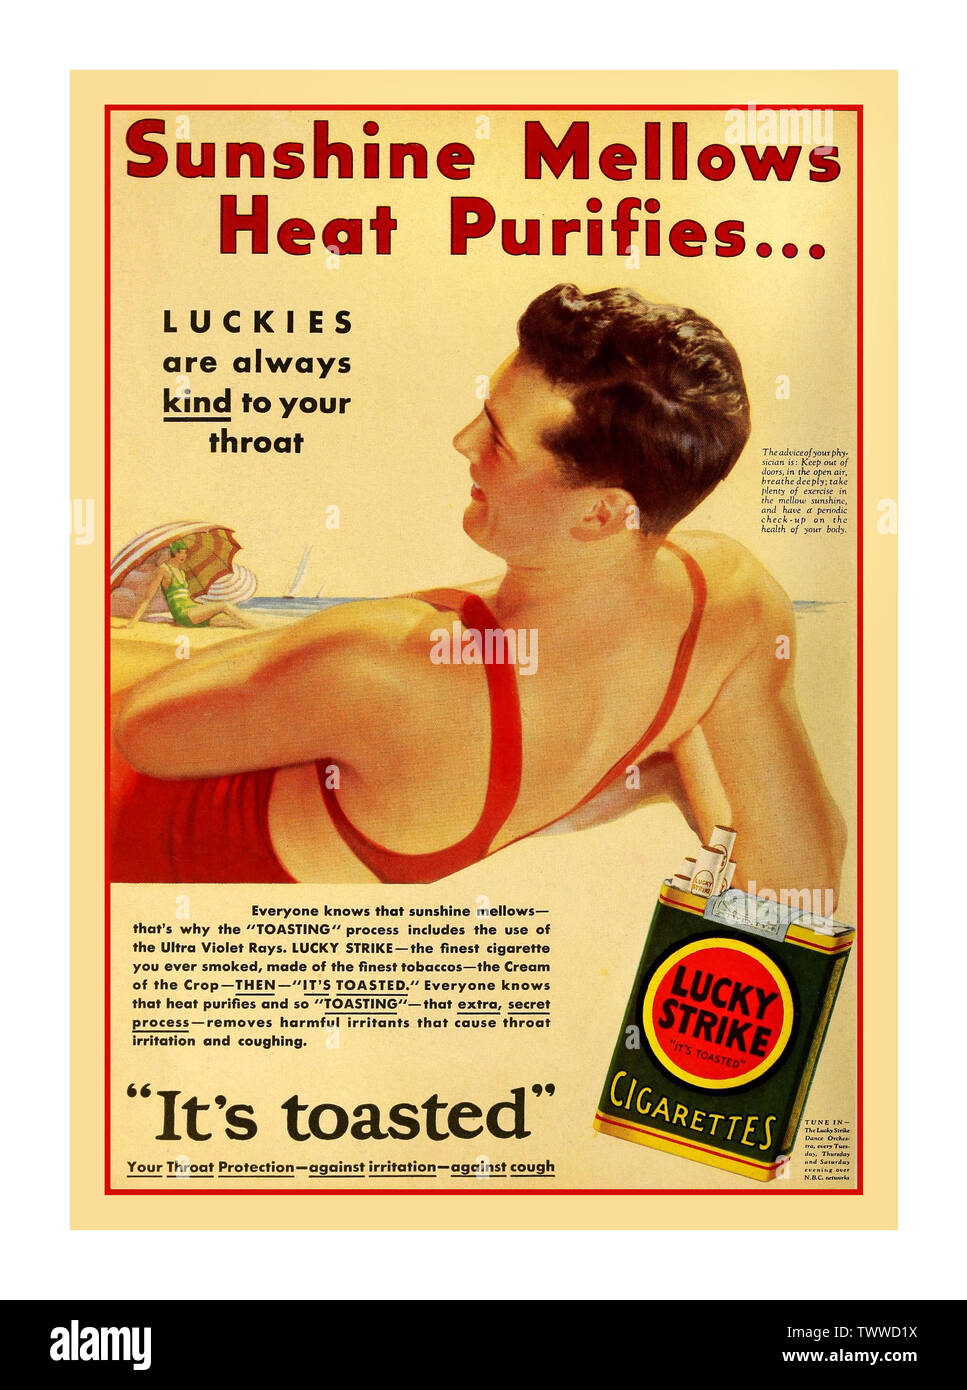 Vintage 1930’s American cigarette advertising extolling the paricular health benefits and virtues of Lucky Strike cigarettes “ Sunshine Mellows Heat Purifies..”  “Its Toasted” 1 April 1931 Stock Photo